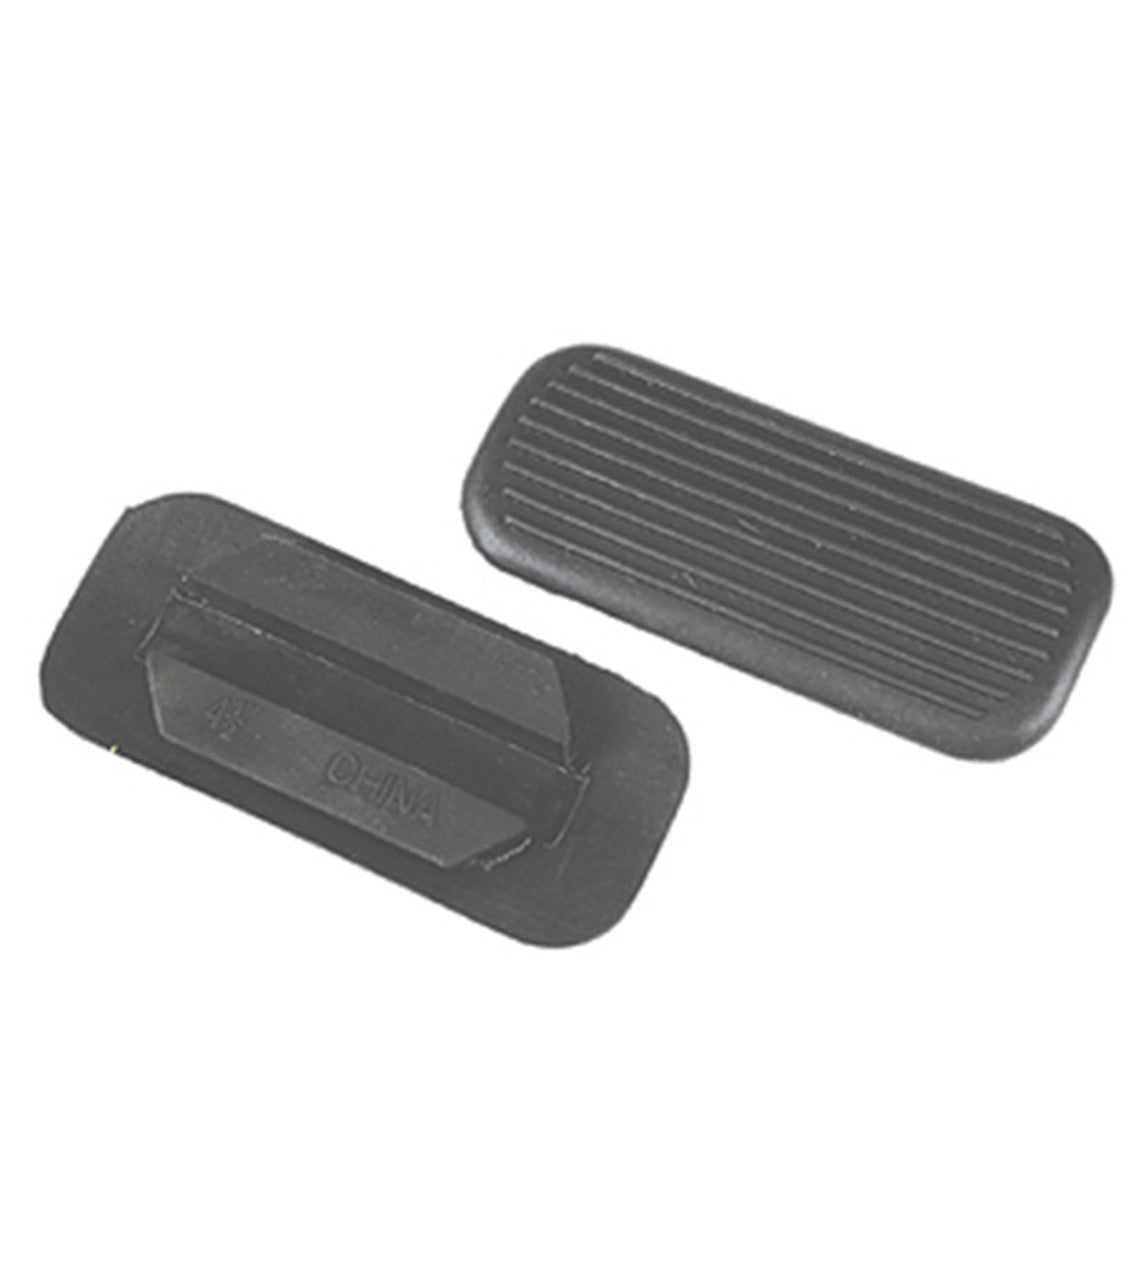 Replacement Pads for Peacock Safety Stirrups Black-TexanSaddles.com